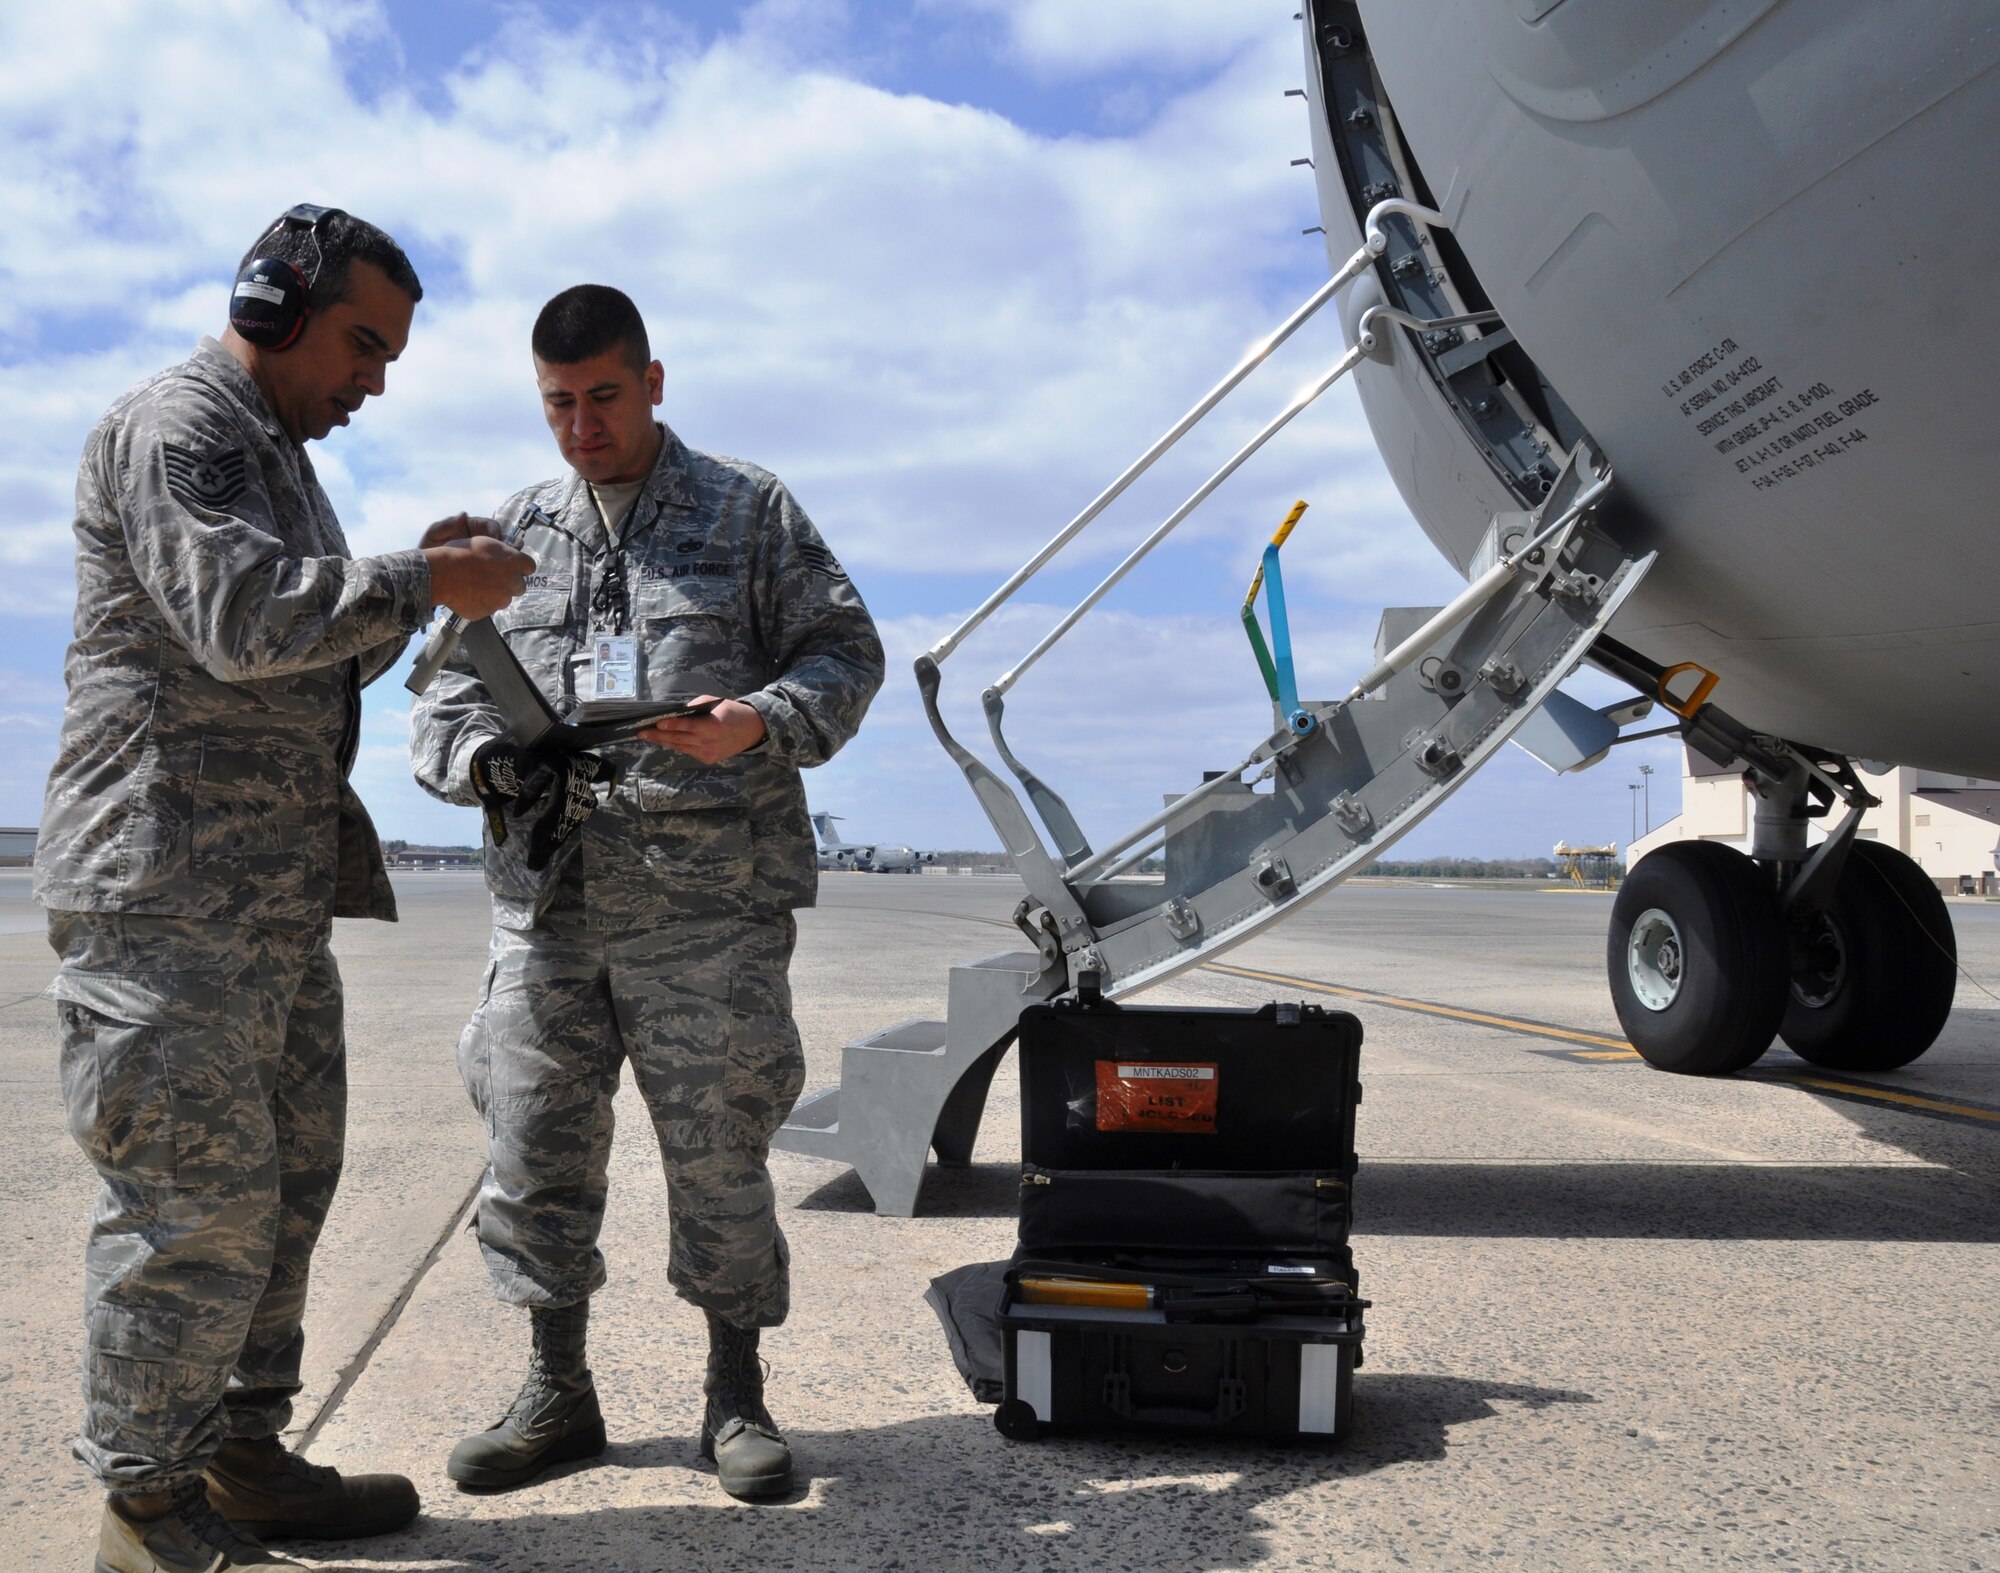 Tech Sgt. Dionisio Velez and Staff Sgt. Michael Ramos, 514th Aircraft Maintenance Squadron electronic warfare systems technicians, review a flare checklist while performing maintenance a C-17 Globemaster III aircraft here April 5 (U.S. Air Force photo Senior Airman Chelsea Smith).